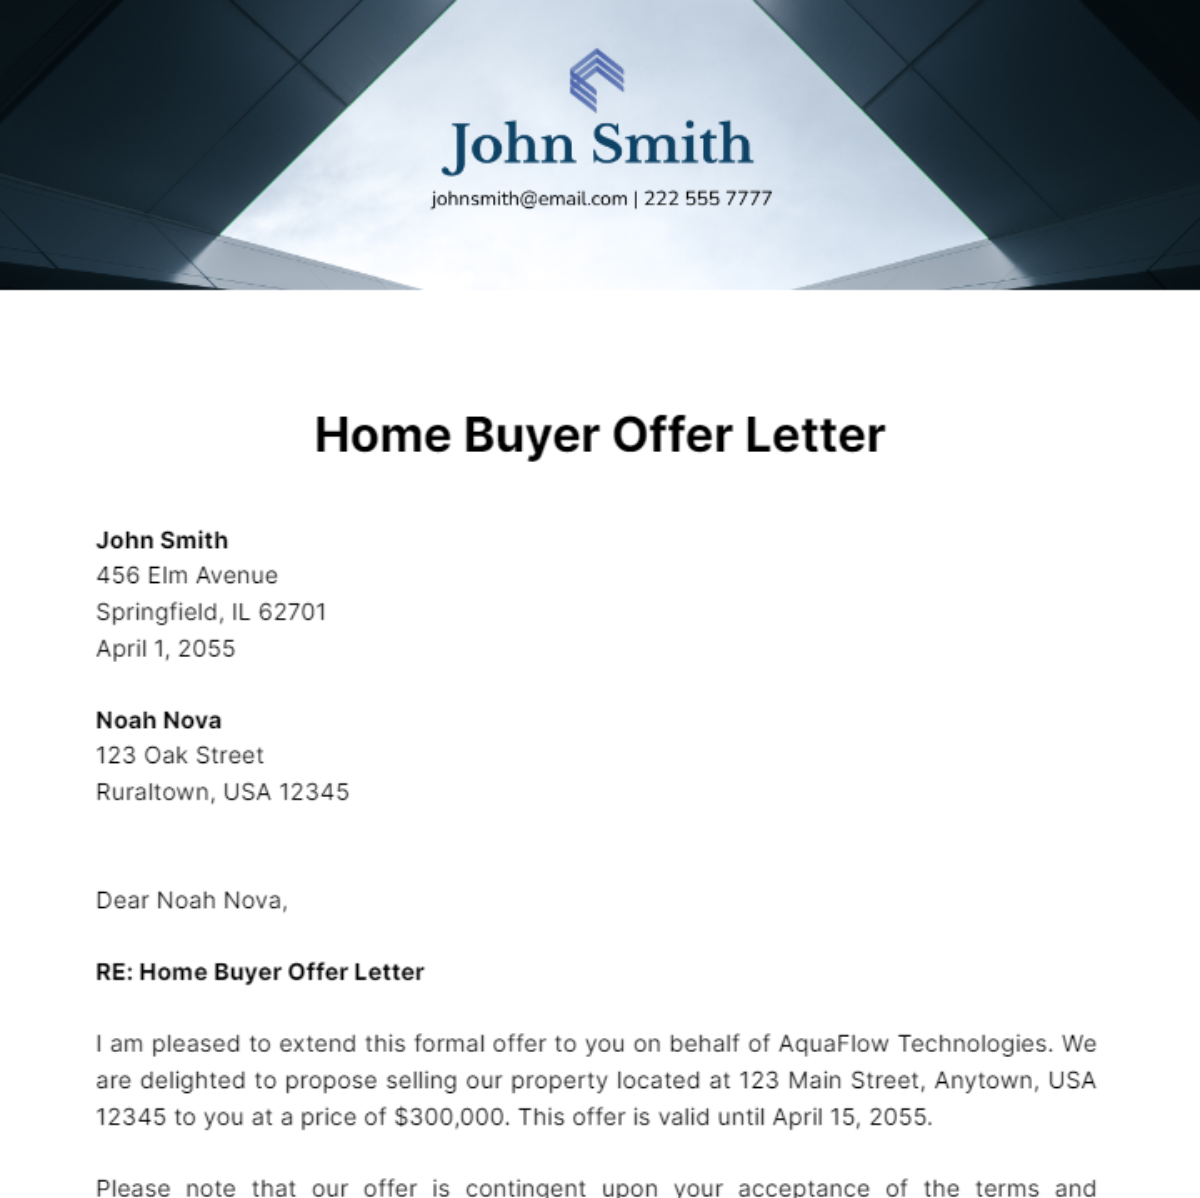 Home Buyer Offer Letter Template